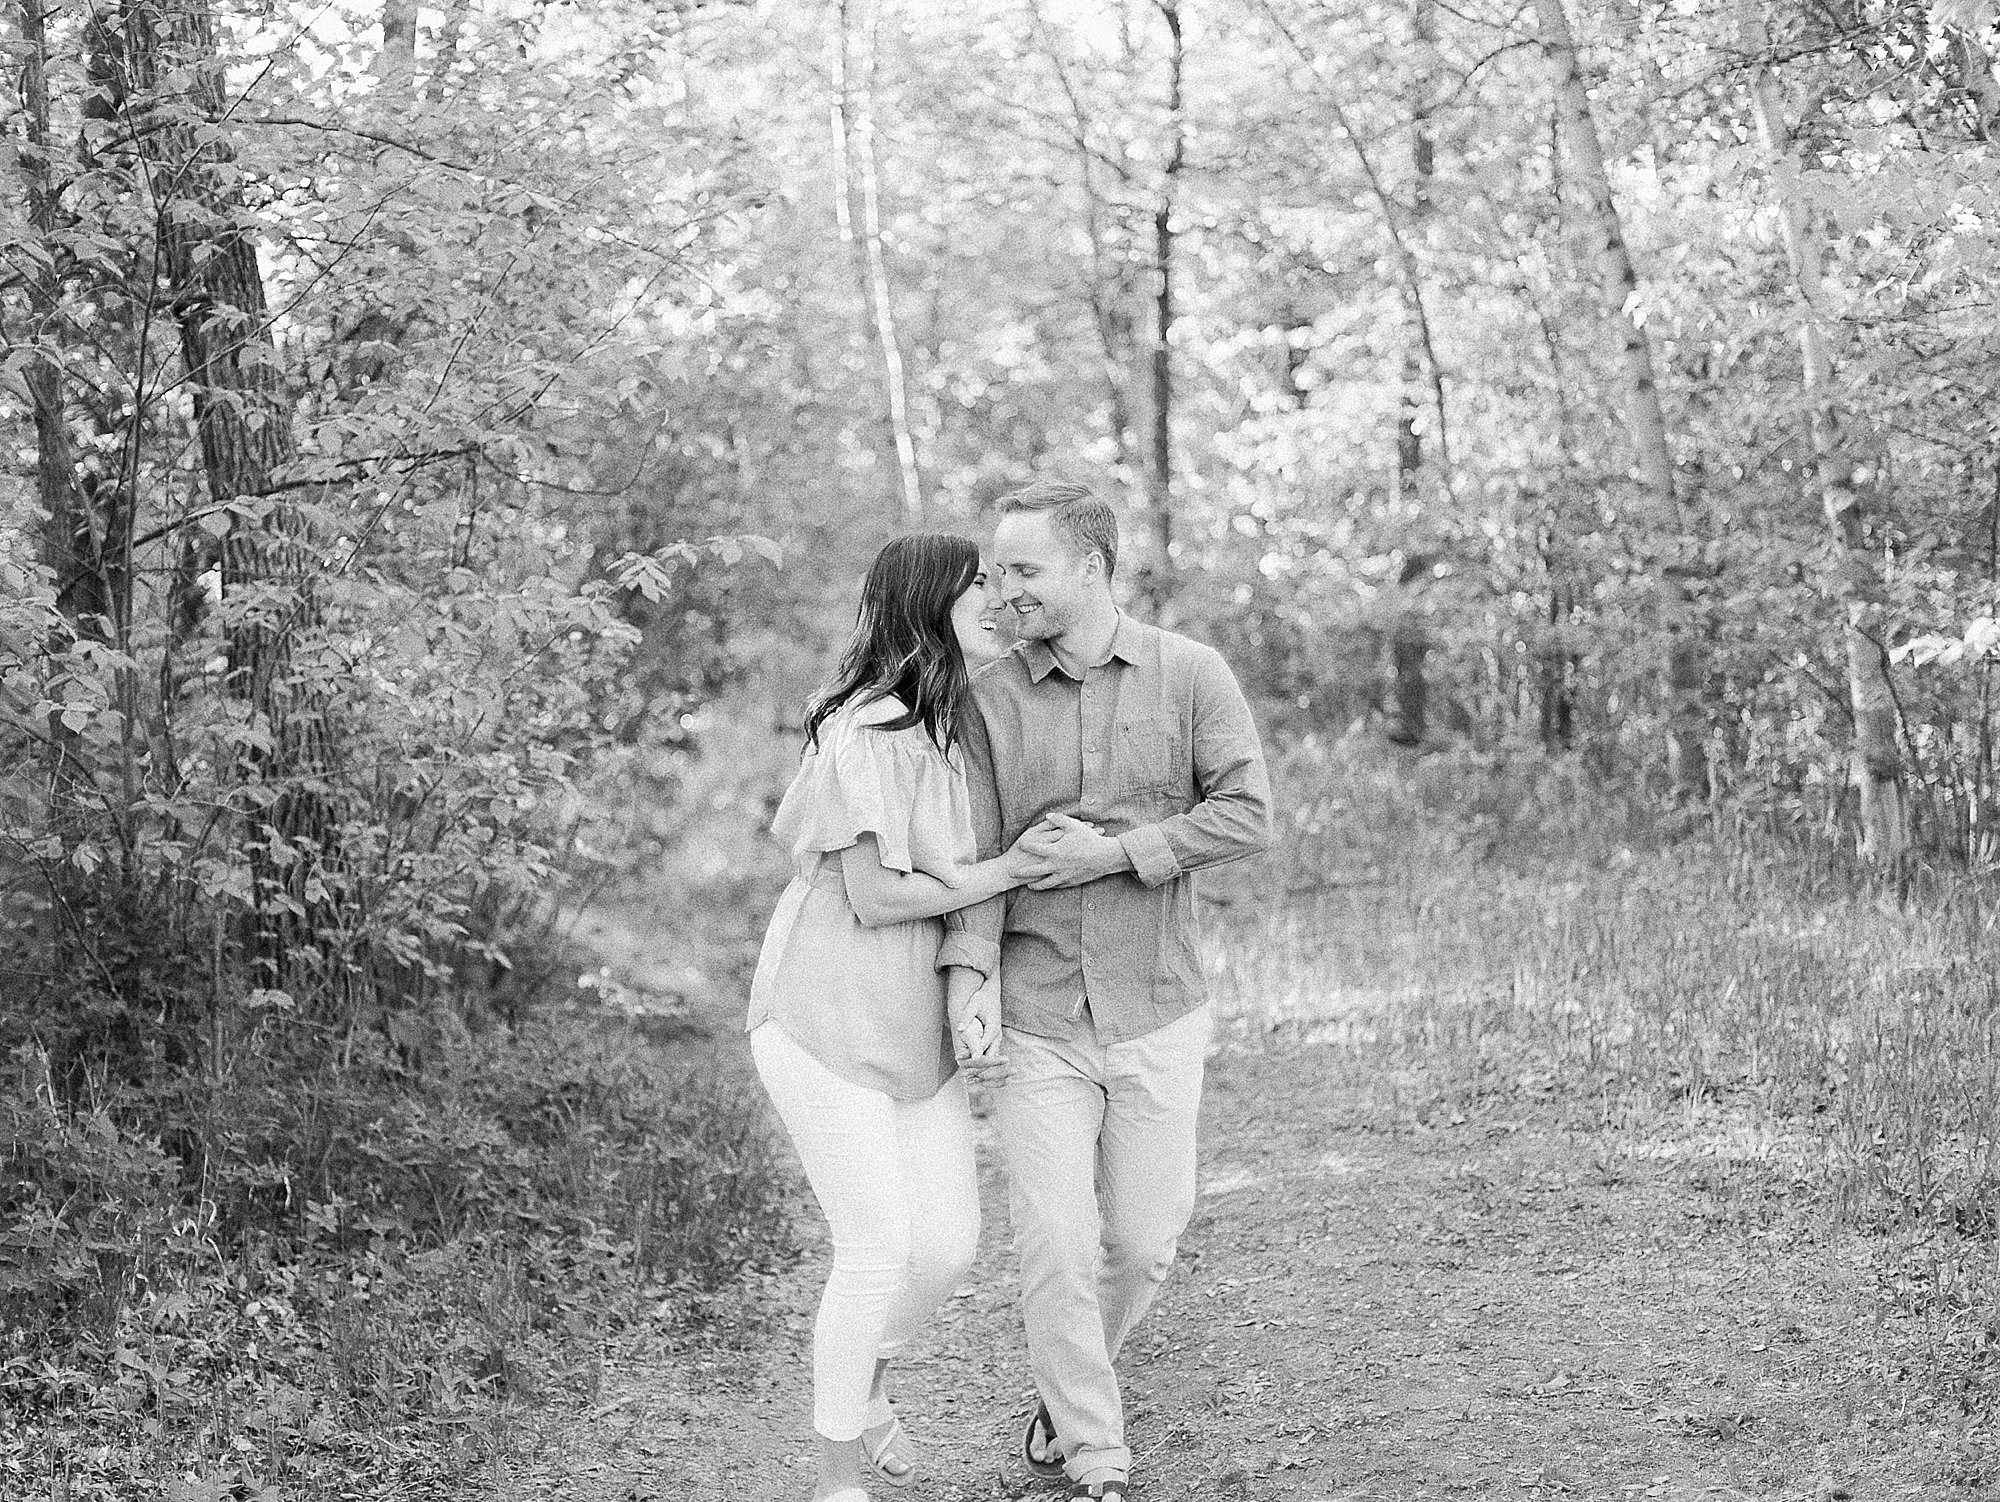 fun engagement photo ideas, cute couples pic pose ideas, black and white photography, manitoba wedding vendors